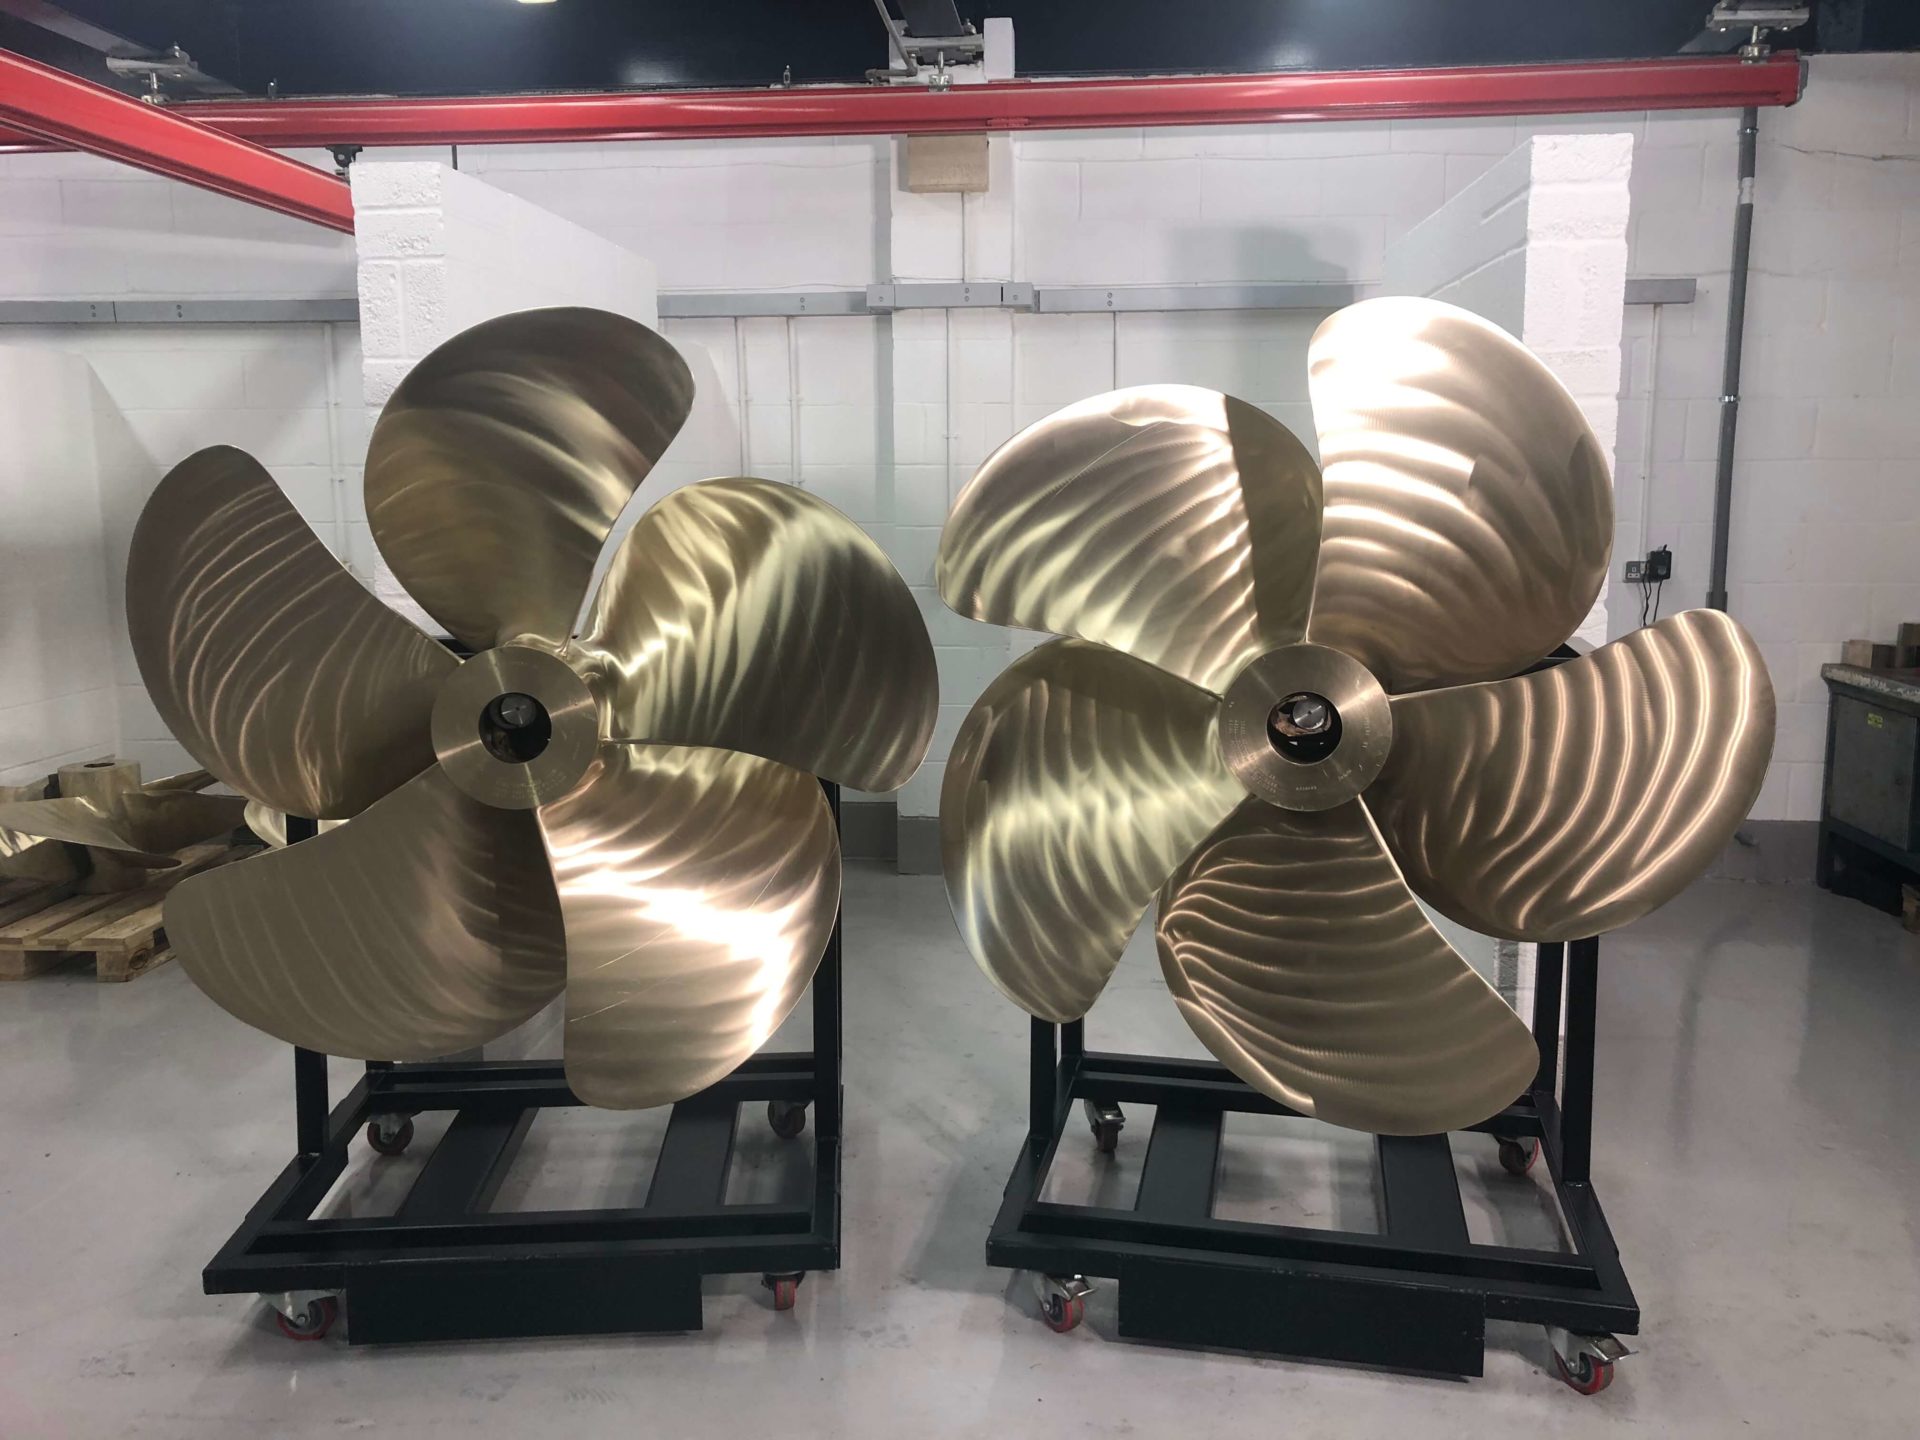 A new set of superyacht propellers, created from scratch in less than two weeks, destined for Gulf Craft's 175